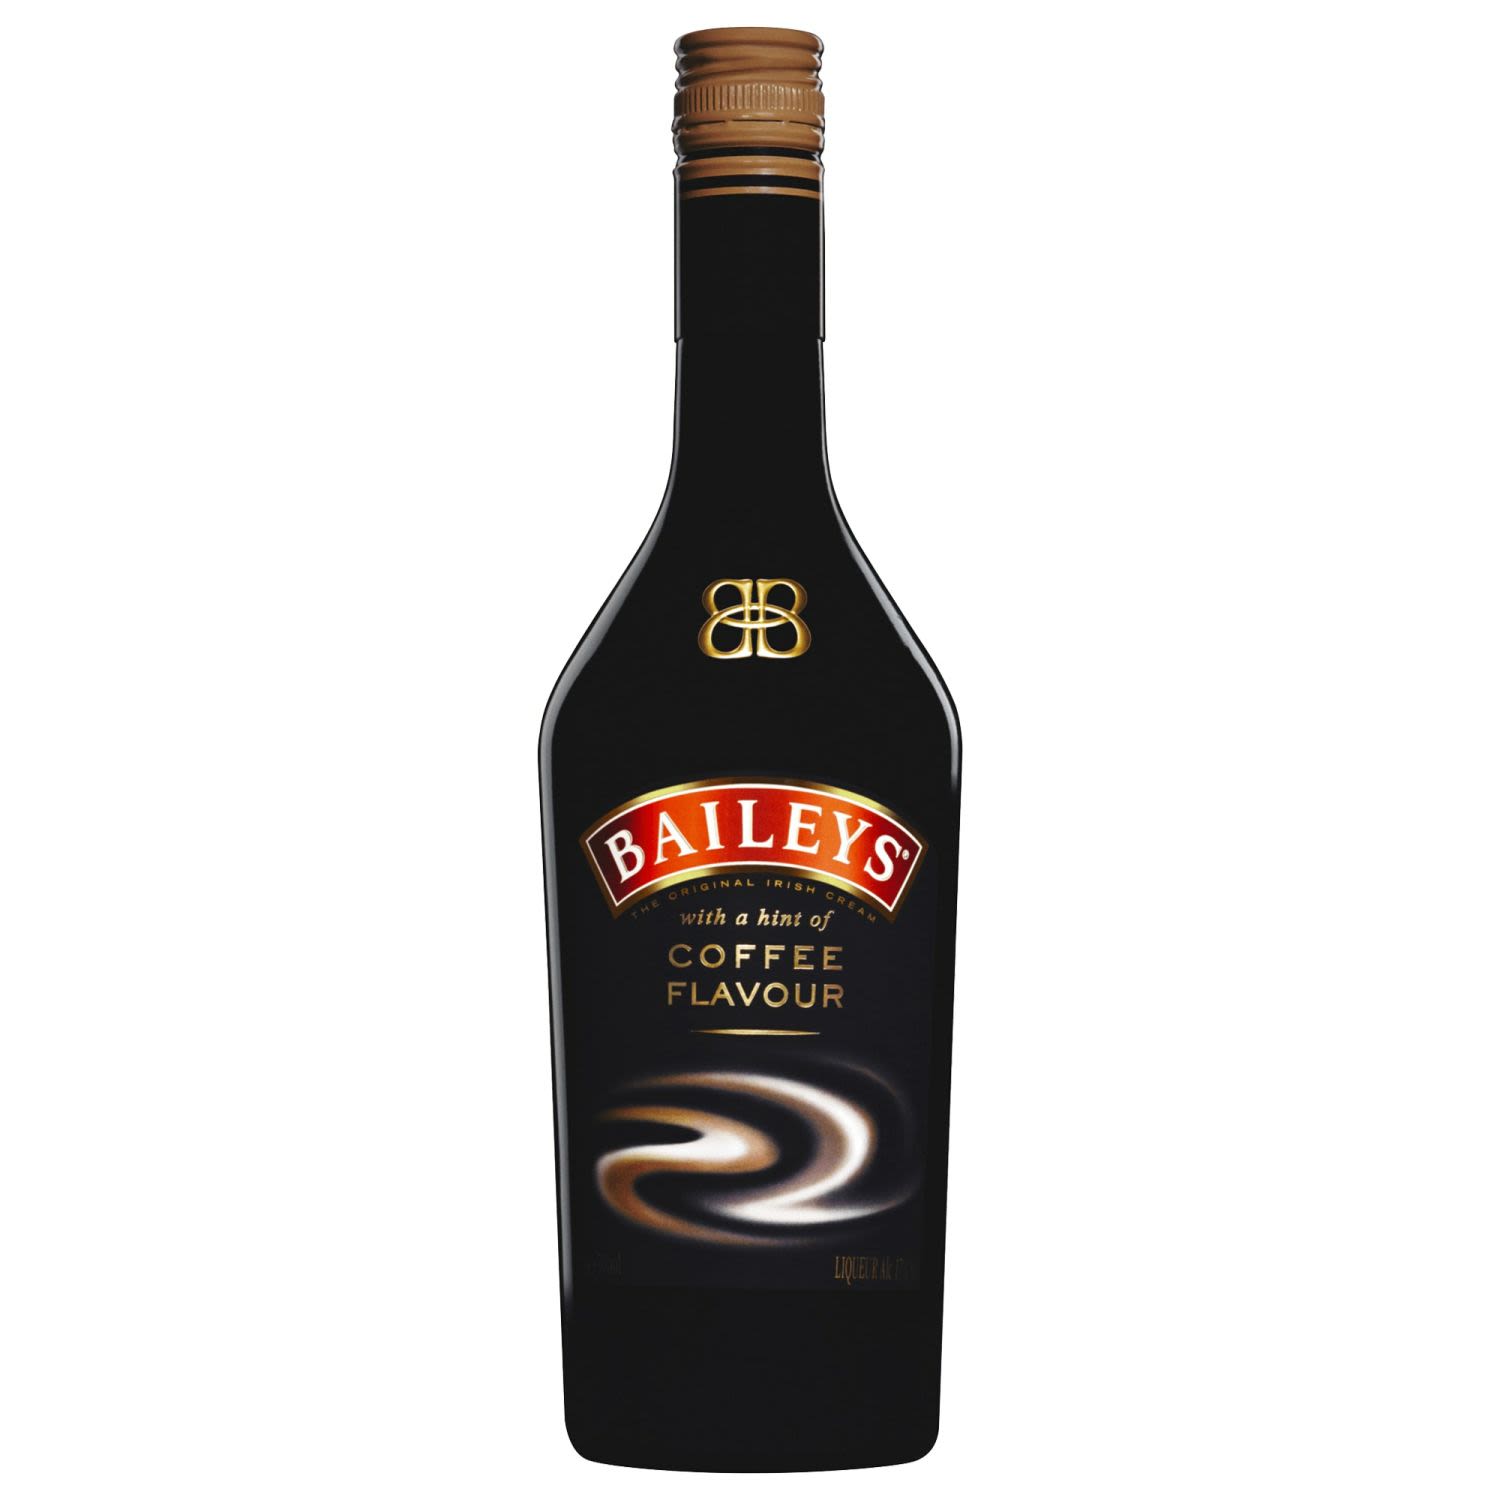 Baileys Original Irish Creme With a Hint of Coffee Liqueur 700mL<br /> <br />Alcohol Volume: 17.00%<br /><br />Pack Format: Bottle<br /><br />Standard Drinks: 9.4</br /><br />Pack Type: Bottle<br /><br />Country of Origin: Ireland<br />